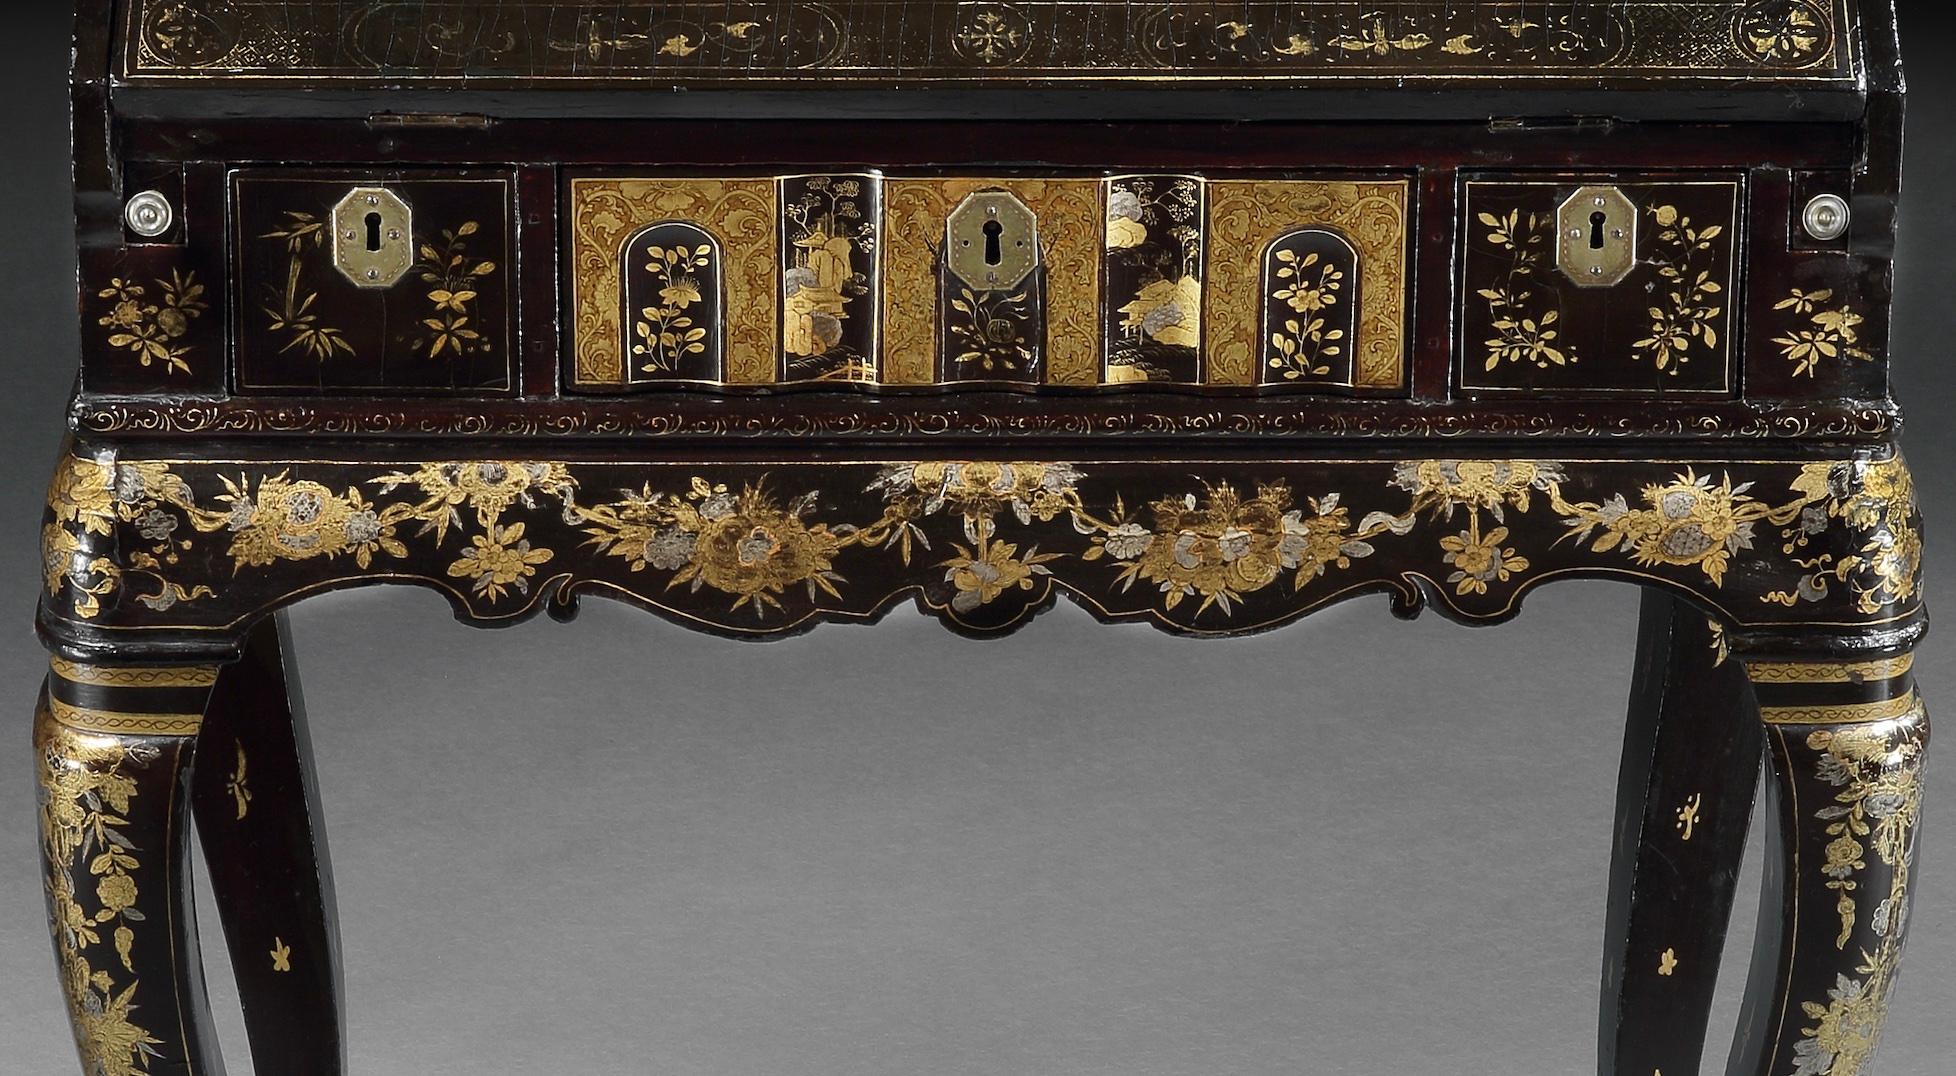 Chinese Export 18th Century Lacquer Bureau on Stand  For Sale 1